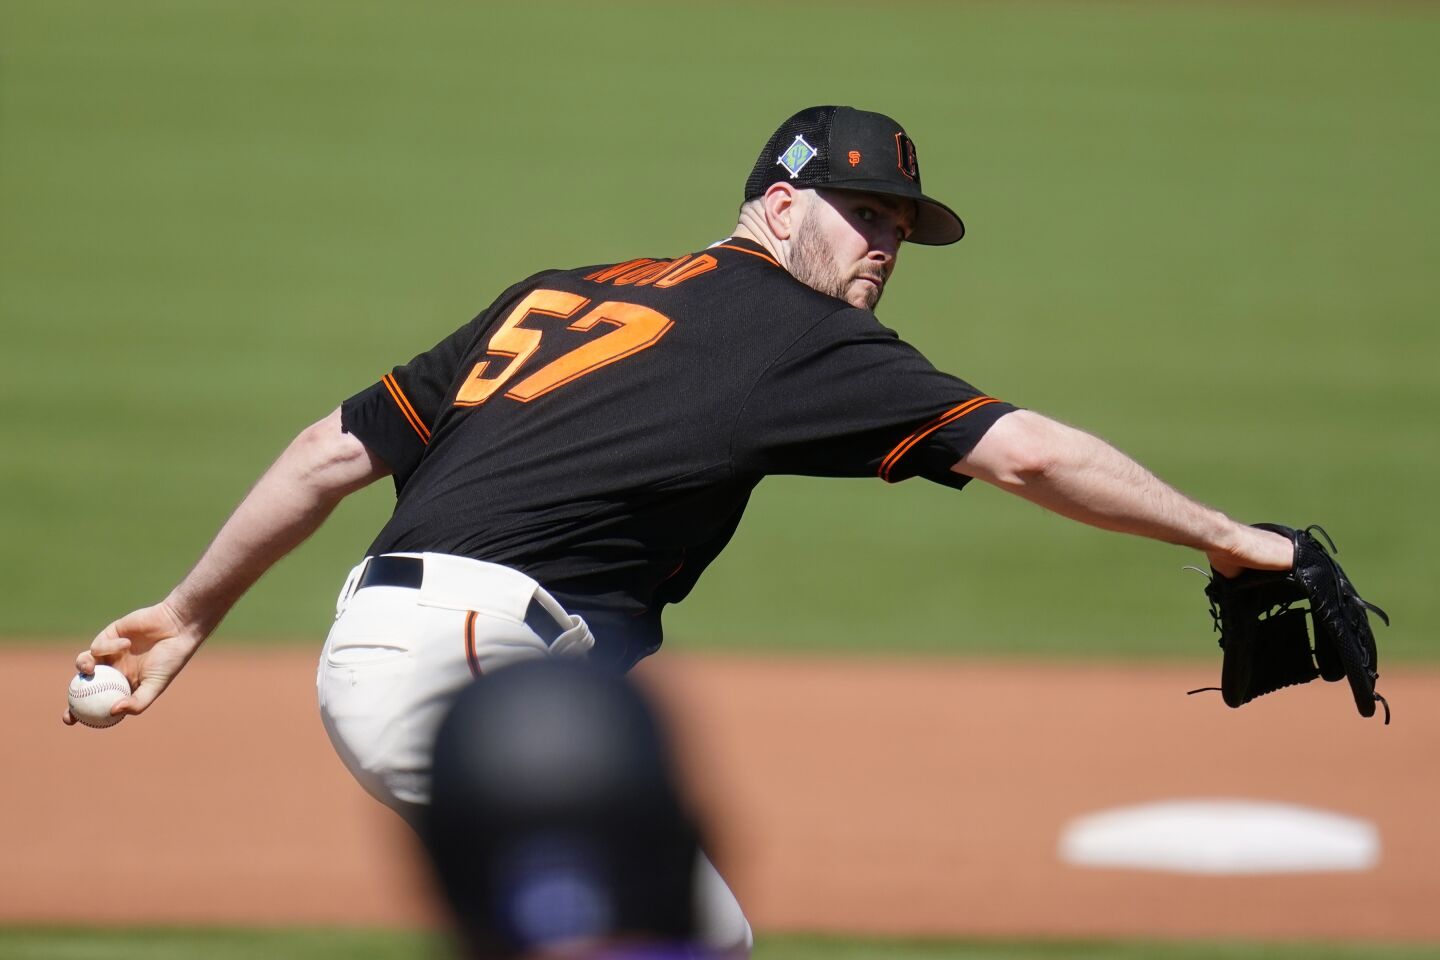 Game 2: Giants LHP Alex Wood (2022 debut)The 31-year-old revitalized his career last year with the Giants, going 10-4 with a 3.83 ERA after throwing just 12 2/3 innings in 2020 (6.39 ERA). Wood did not face the Padres in 2021, but is 4-2 with a 2.85 ERA, 69 strikeouts and a 1.12 WHP in 66 1/3 career innings against San Diego.